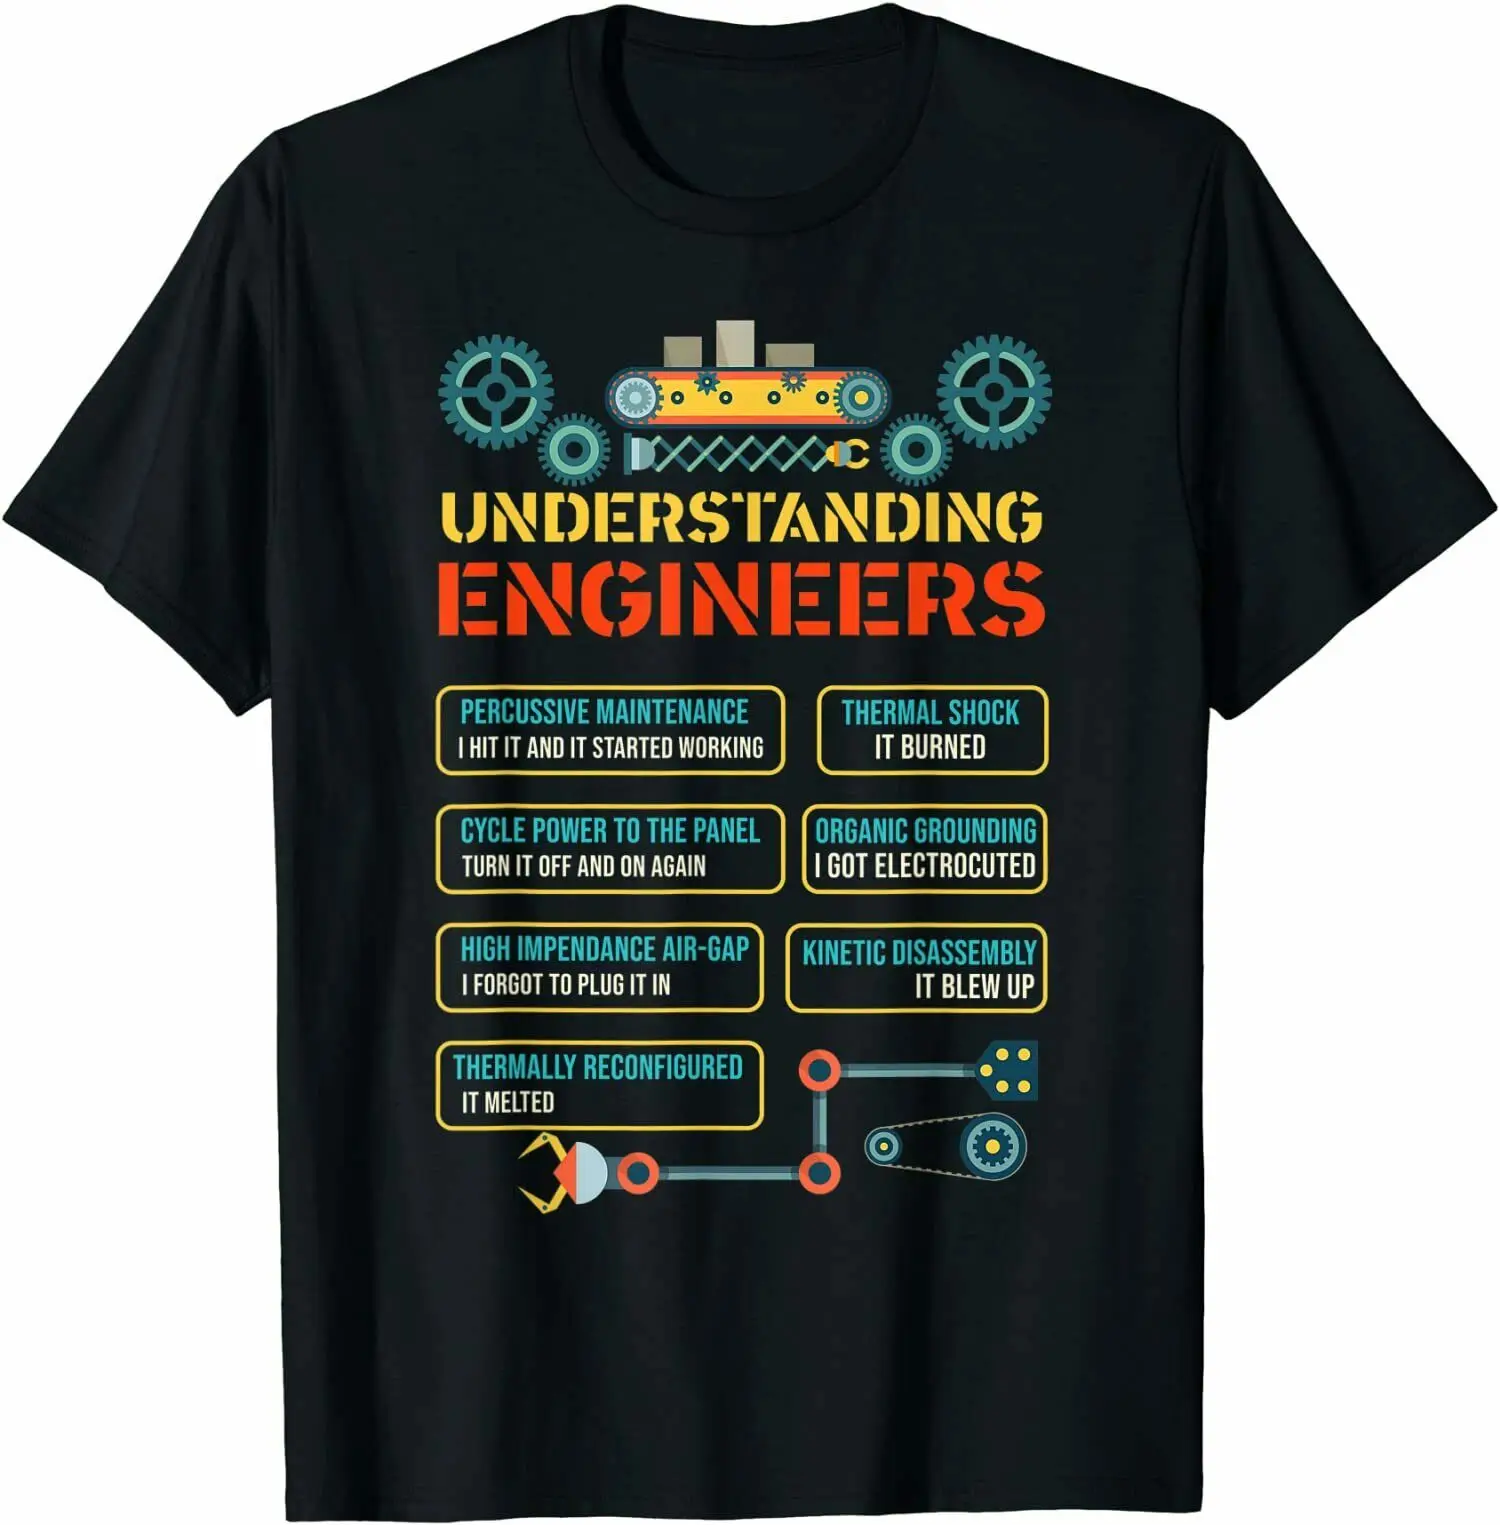 

Understanding Engineers Funny Engineering Great Gift T-Shirt S-3XL Men's 100% Cotton Casual T-shirts Loose Top Size S-3XL